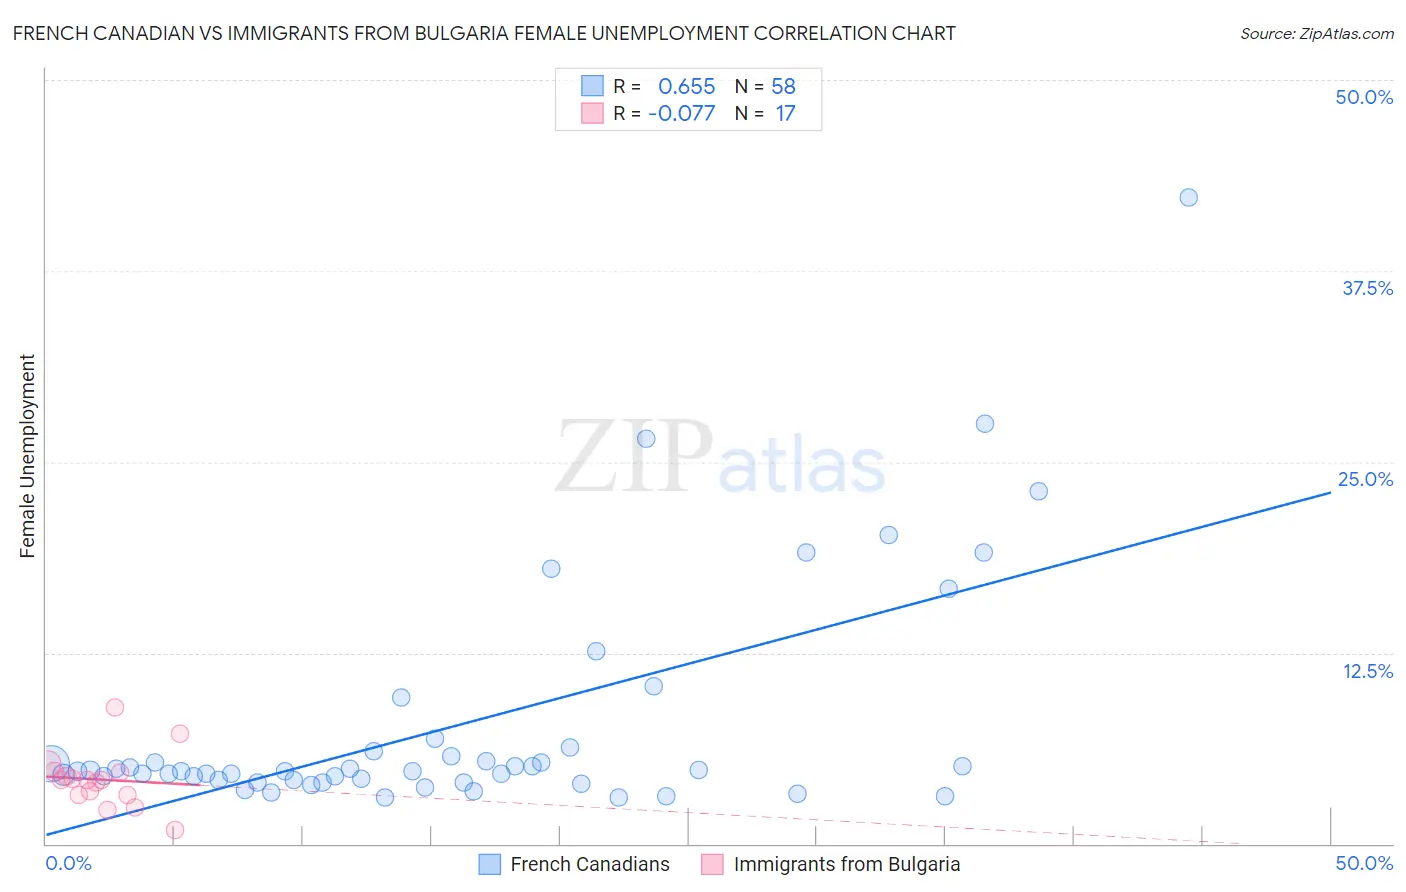 French Canadian vs Immigrants from Bulgaria Female Unemployment